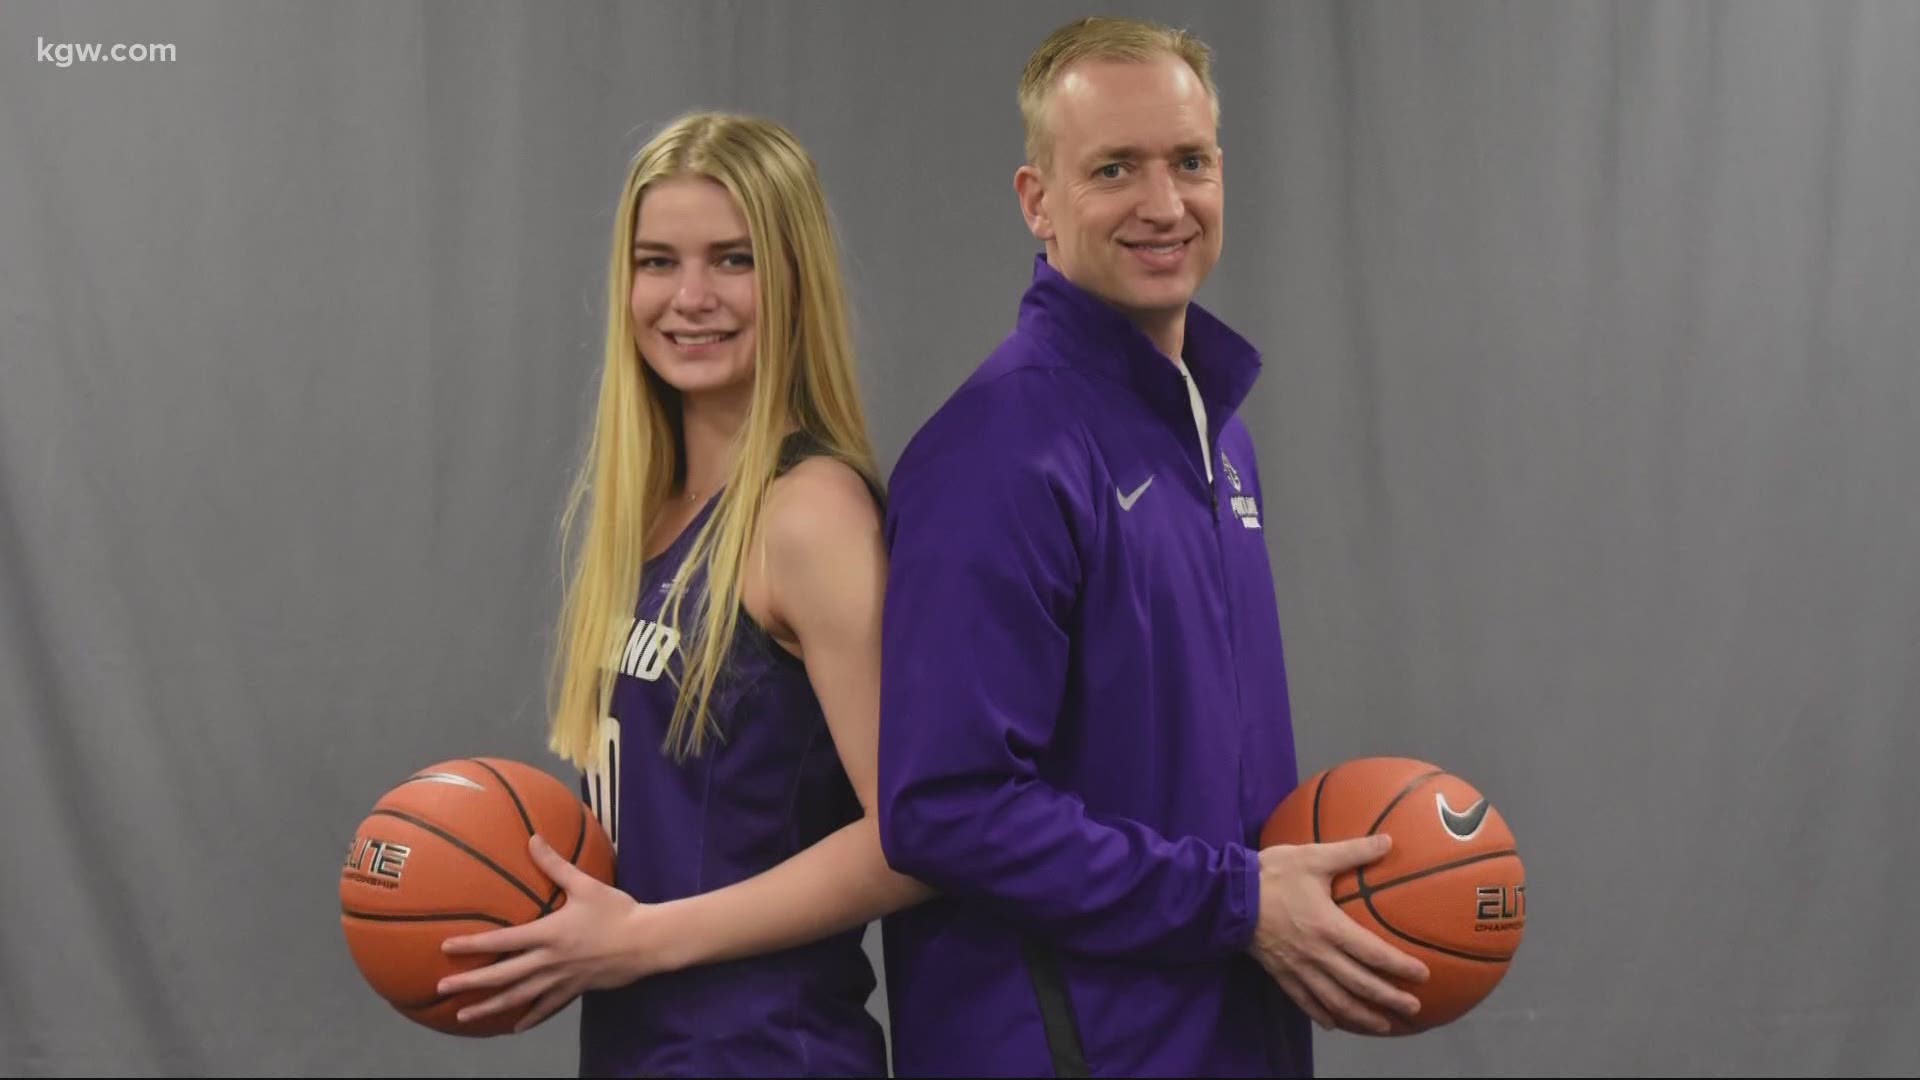 Southridge High School basketball player McKelle Meek committed to play at the University of Portland, where her dad is the head coach.